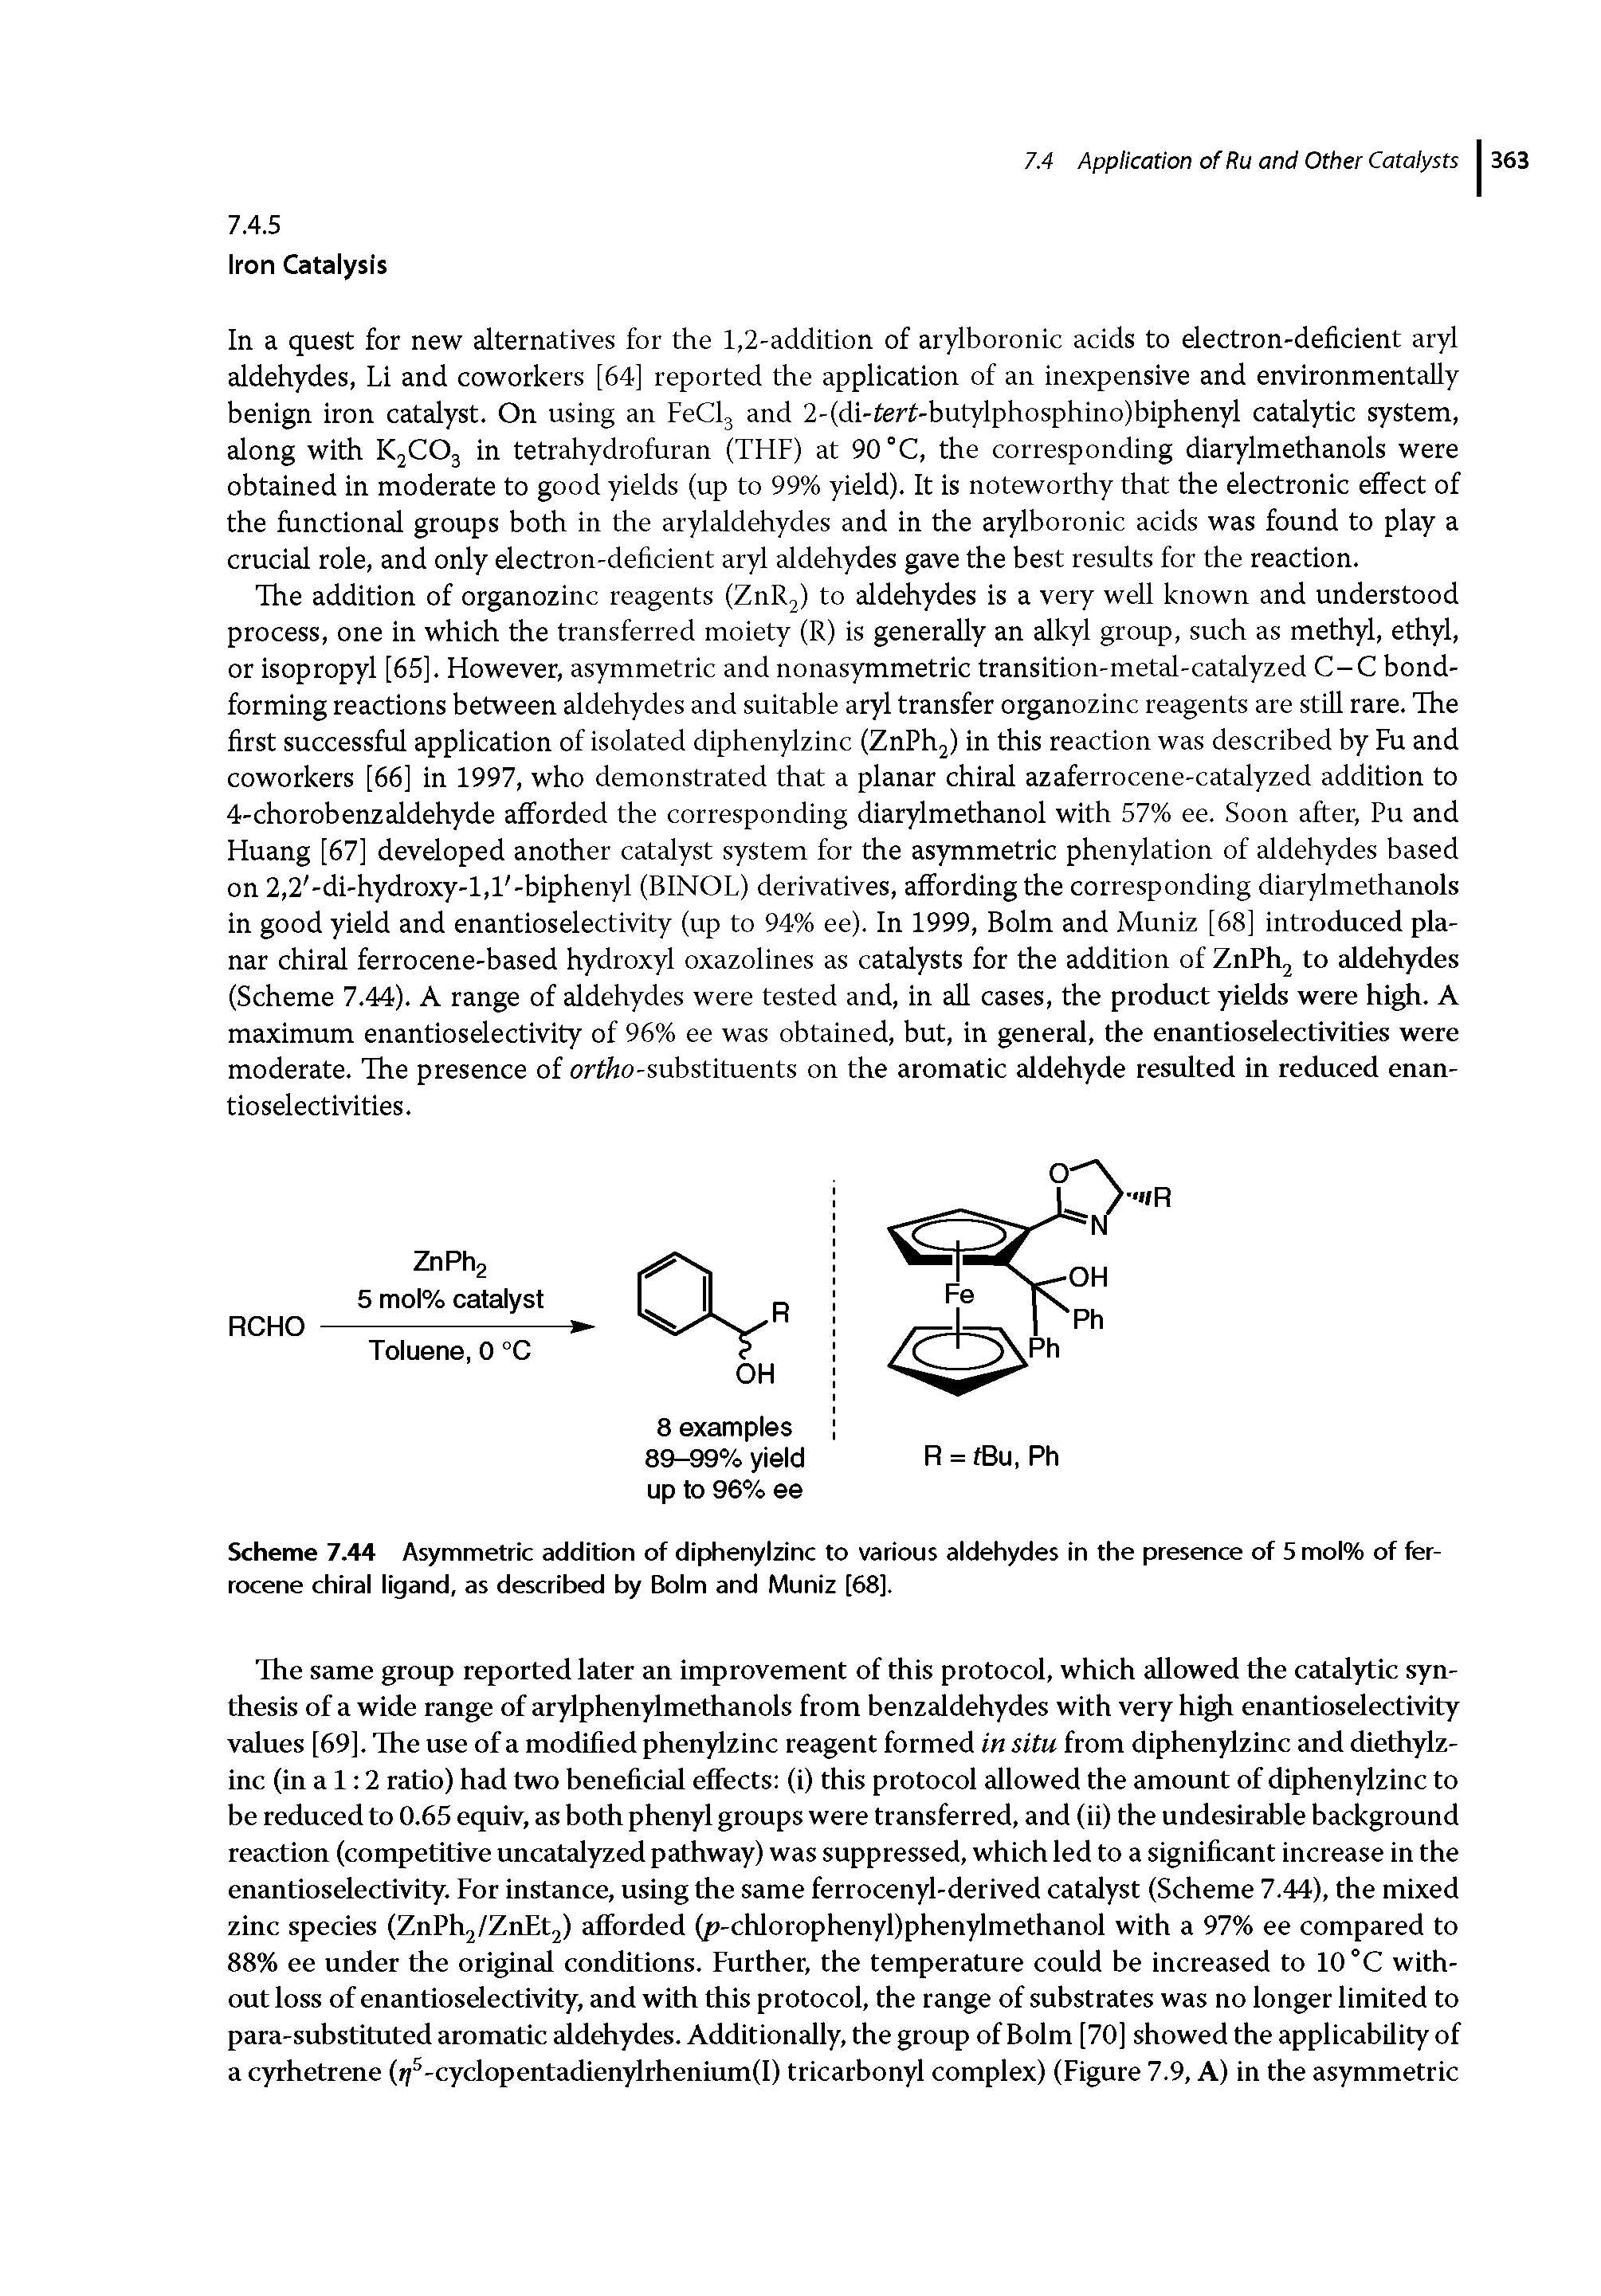 Scheme 7.44 Asymmetric addition of diphenylzinc to various aldehydes in the presence of 5 mol% of ferrocene chiral ligand, as described by Bolm and Muniz [68].